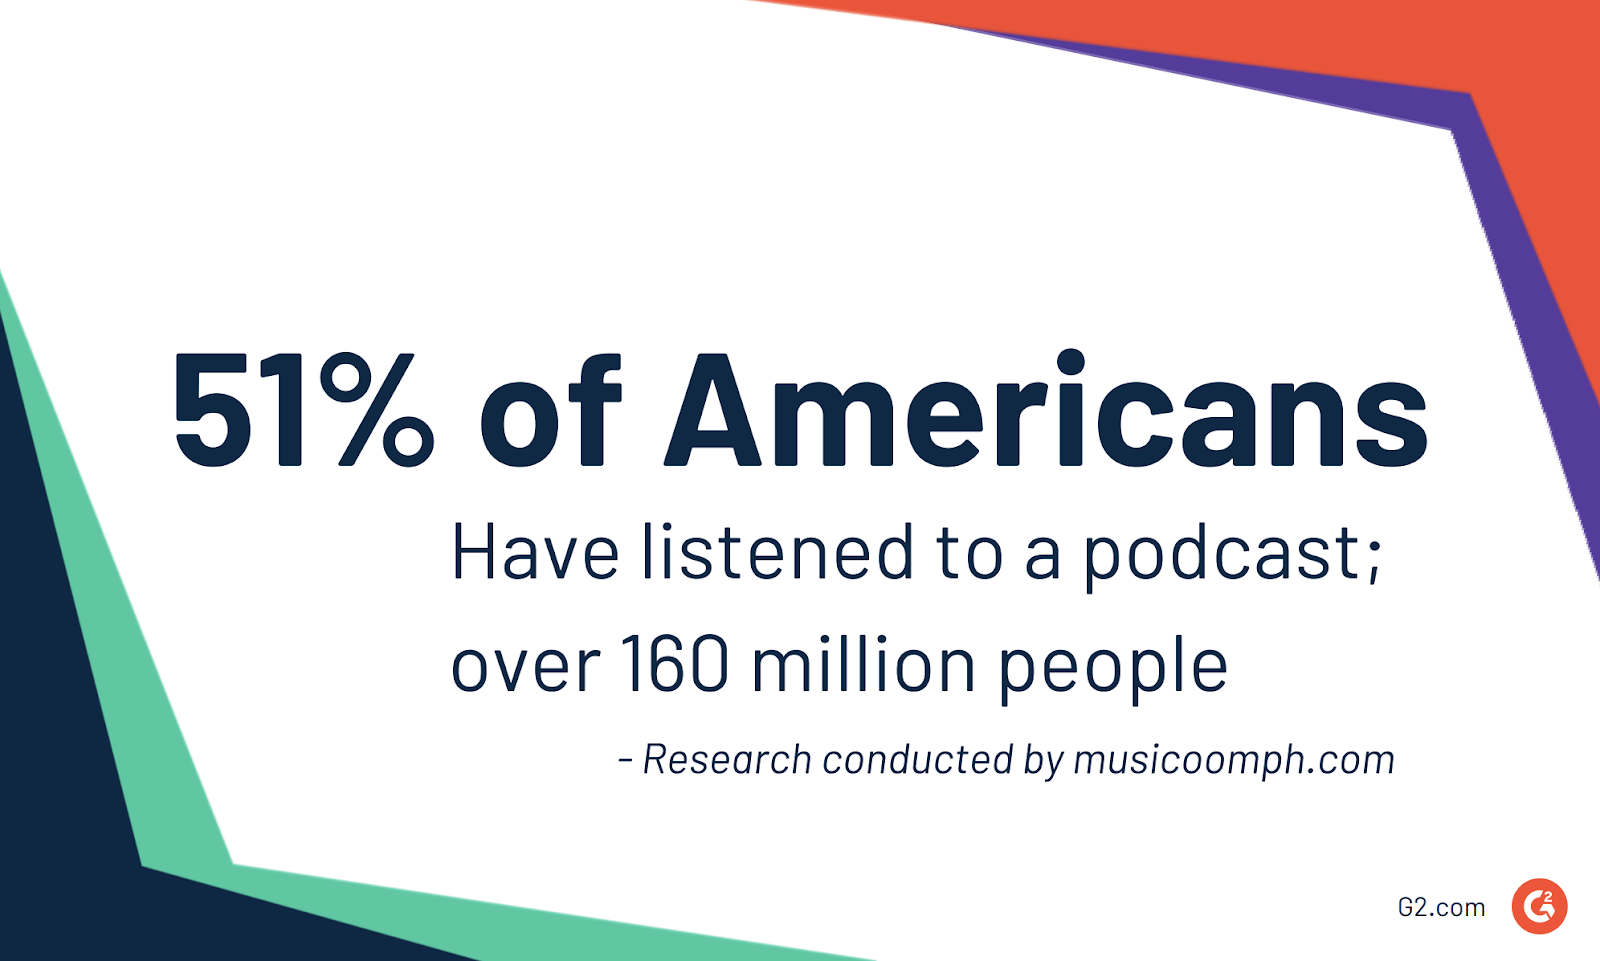 Americans listes to podcasts